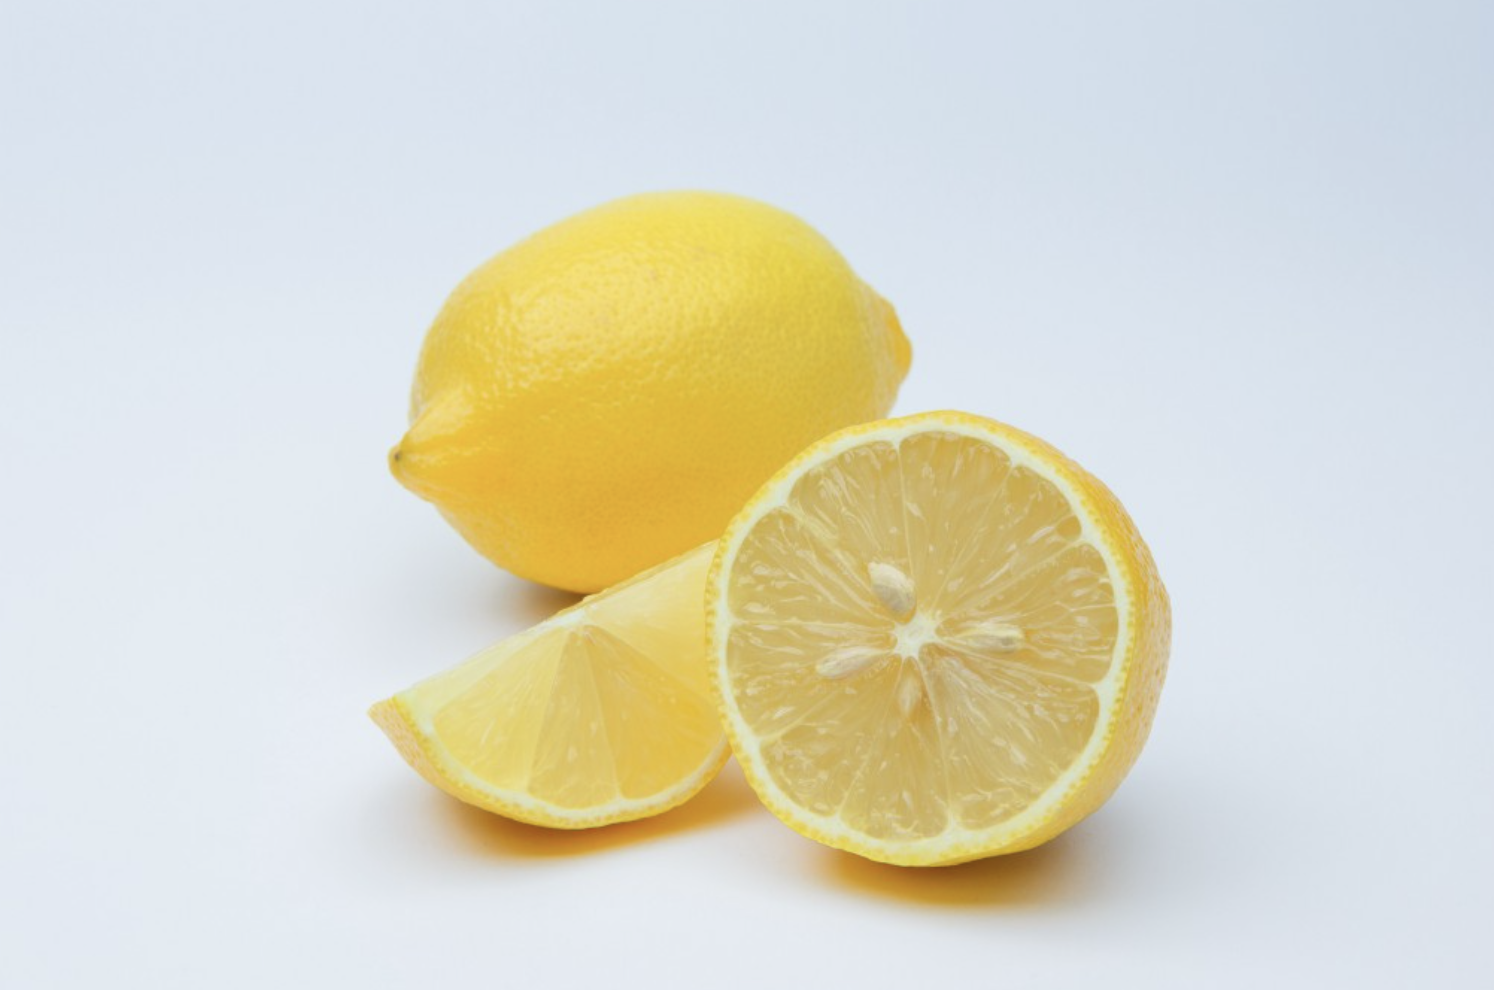 tattoo removal with lemon juice